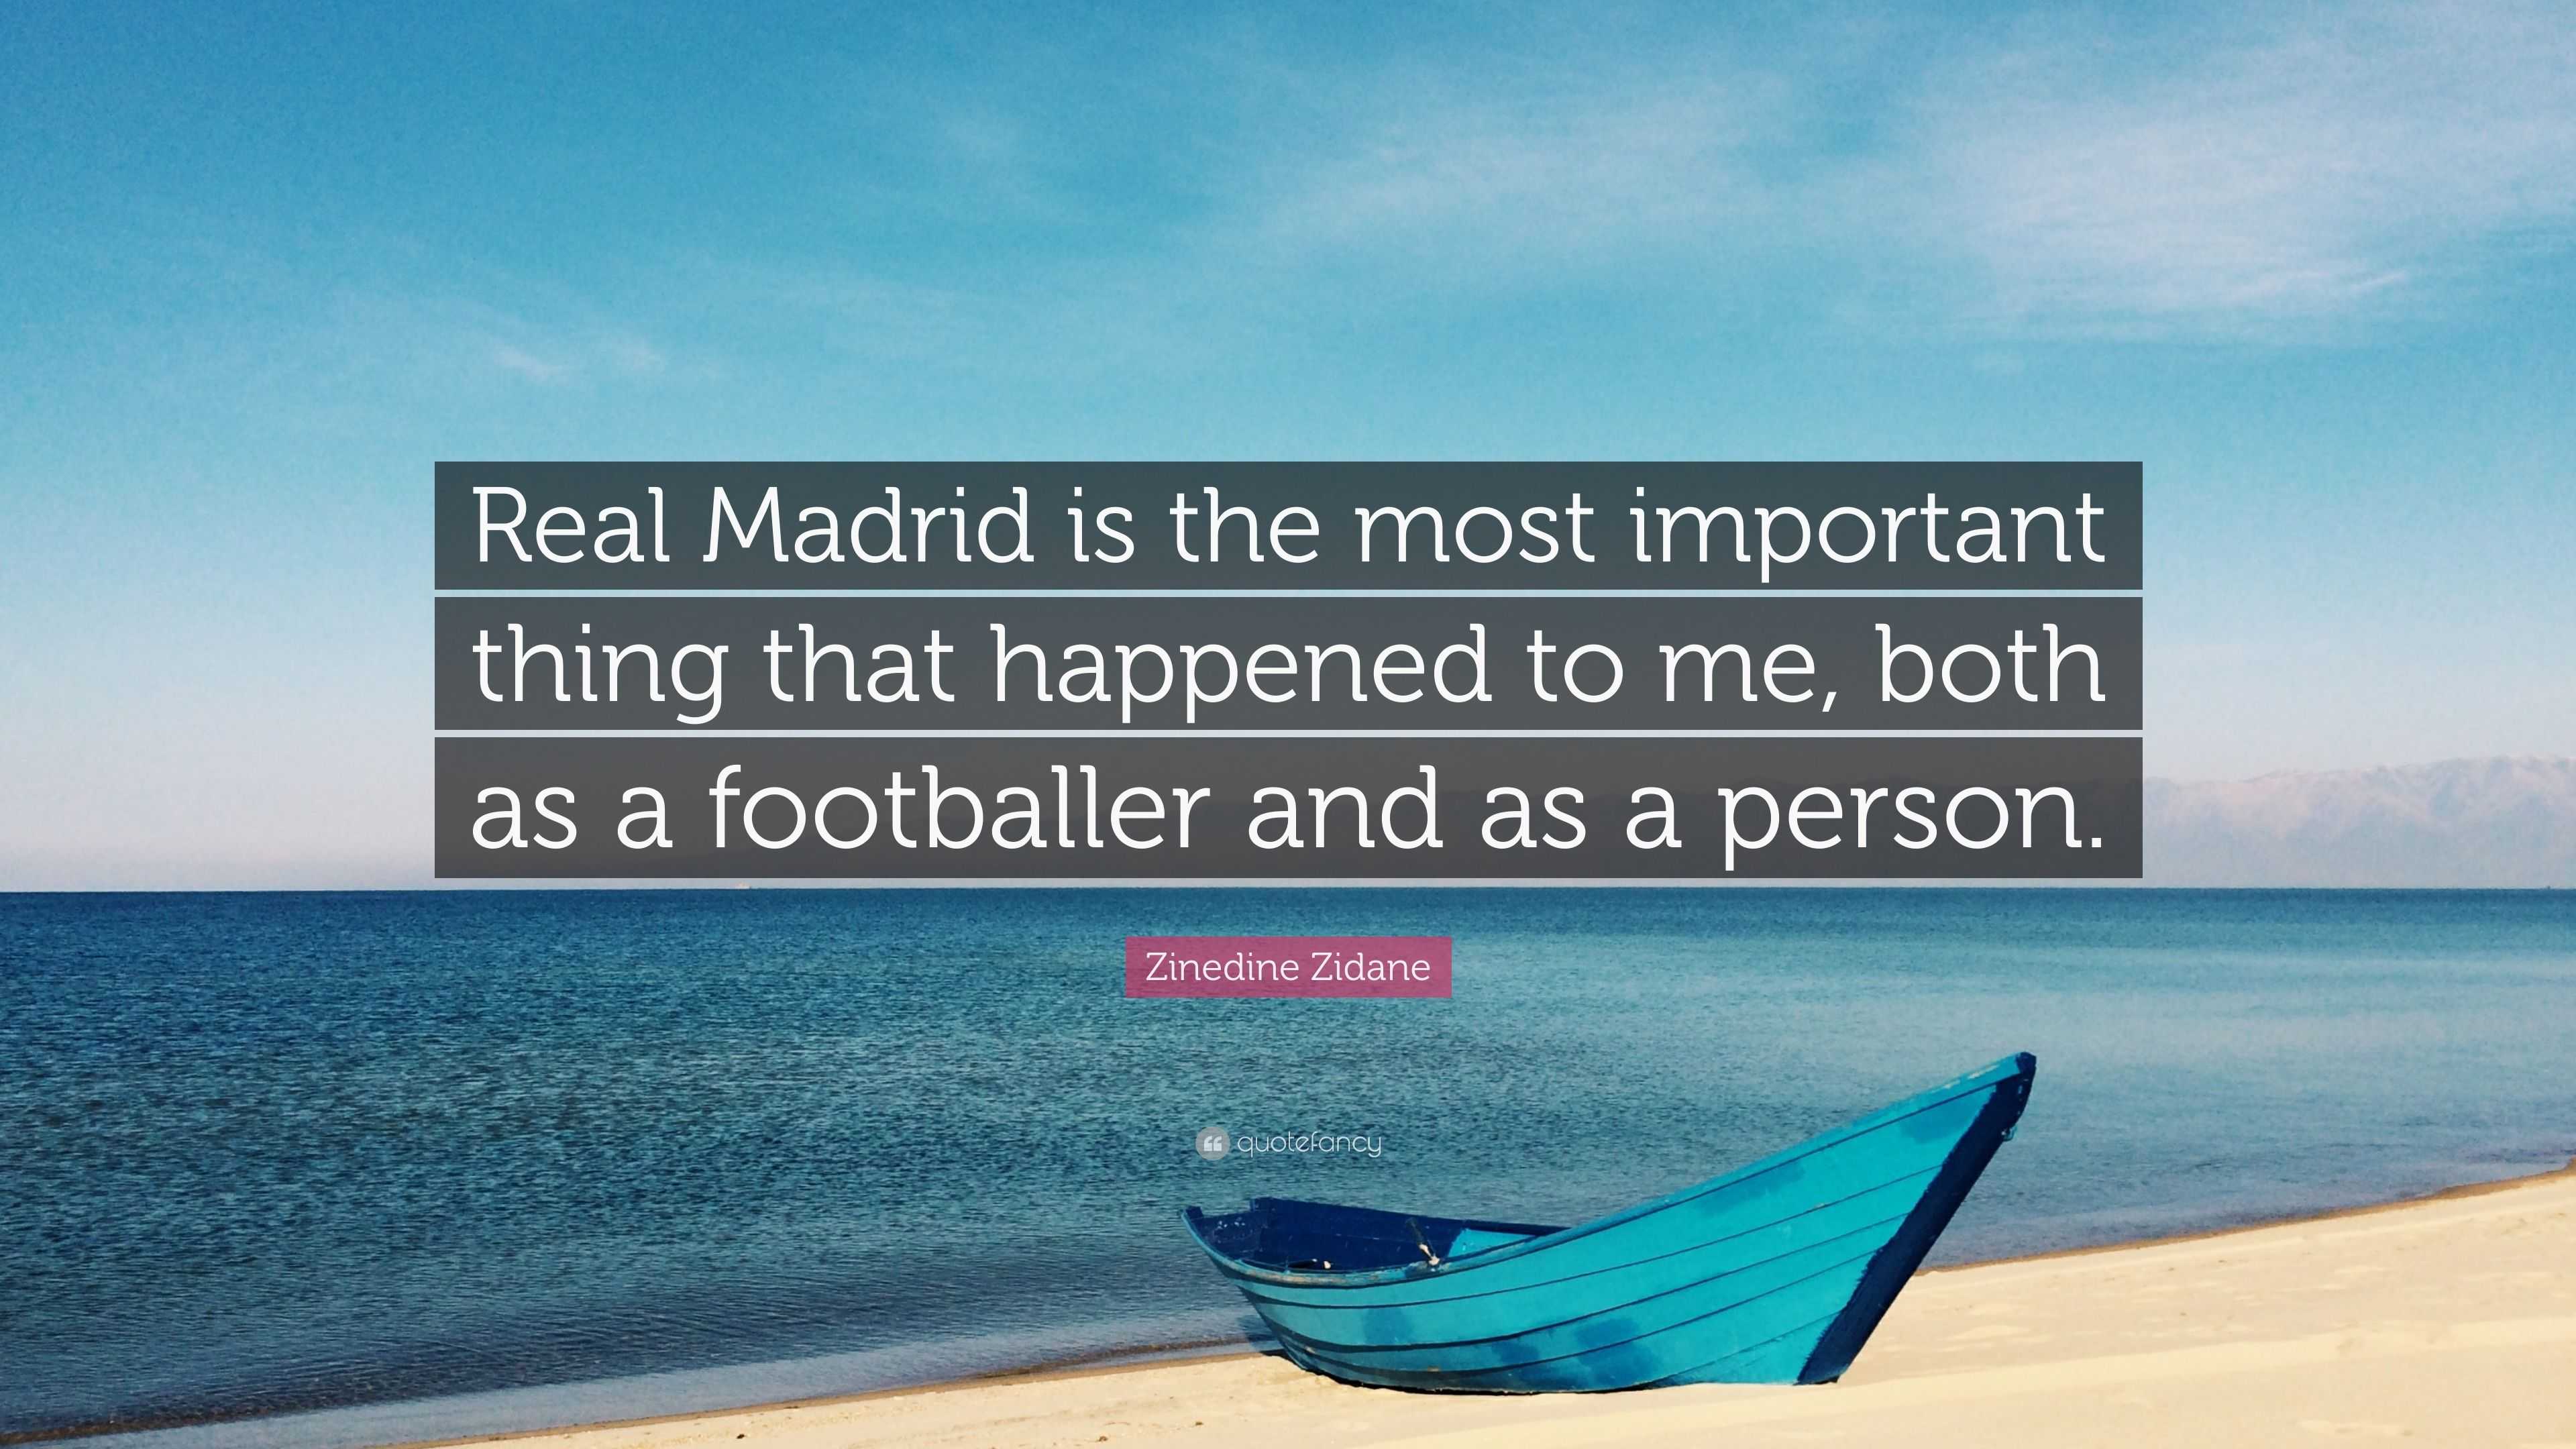 Zinedine Zidane Quote: "Real Madrid is the most important ...